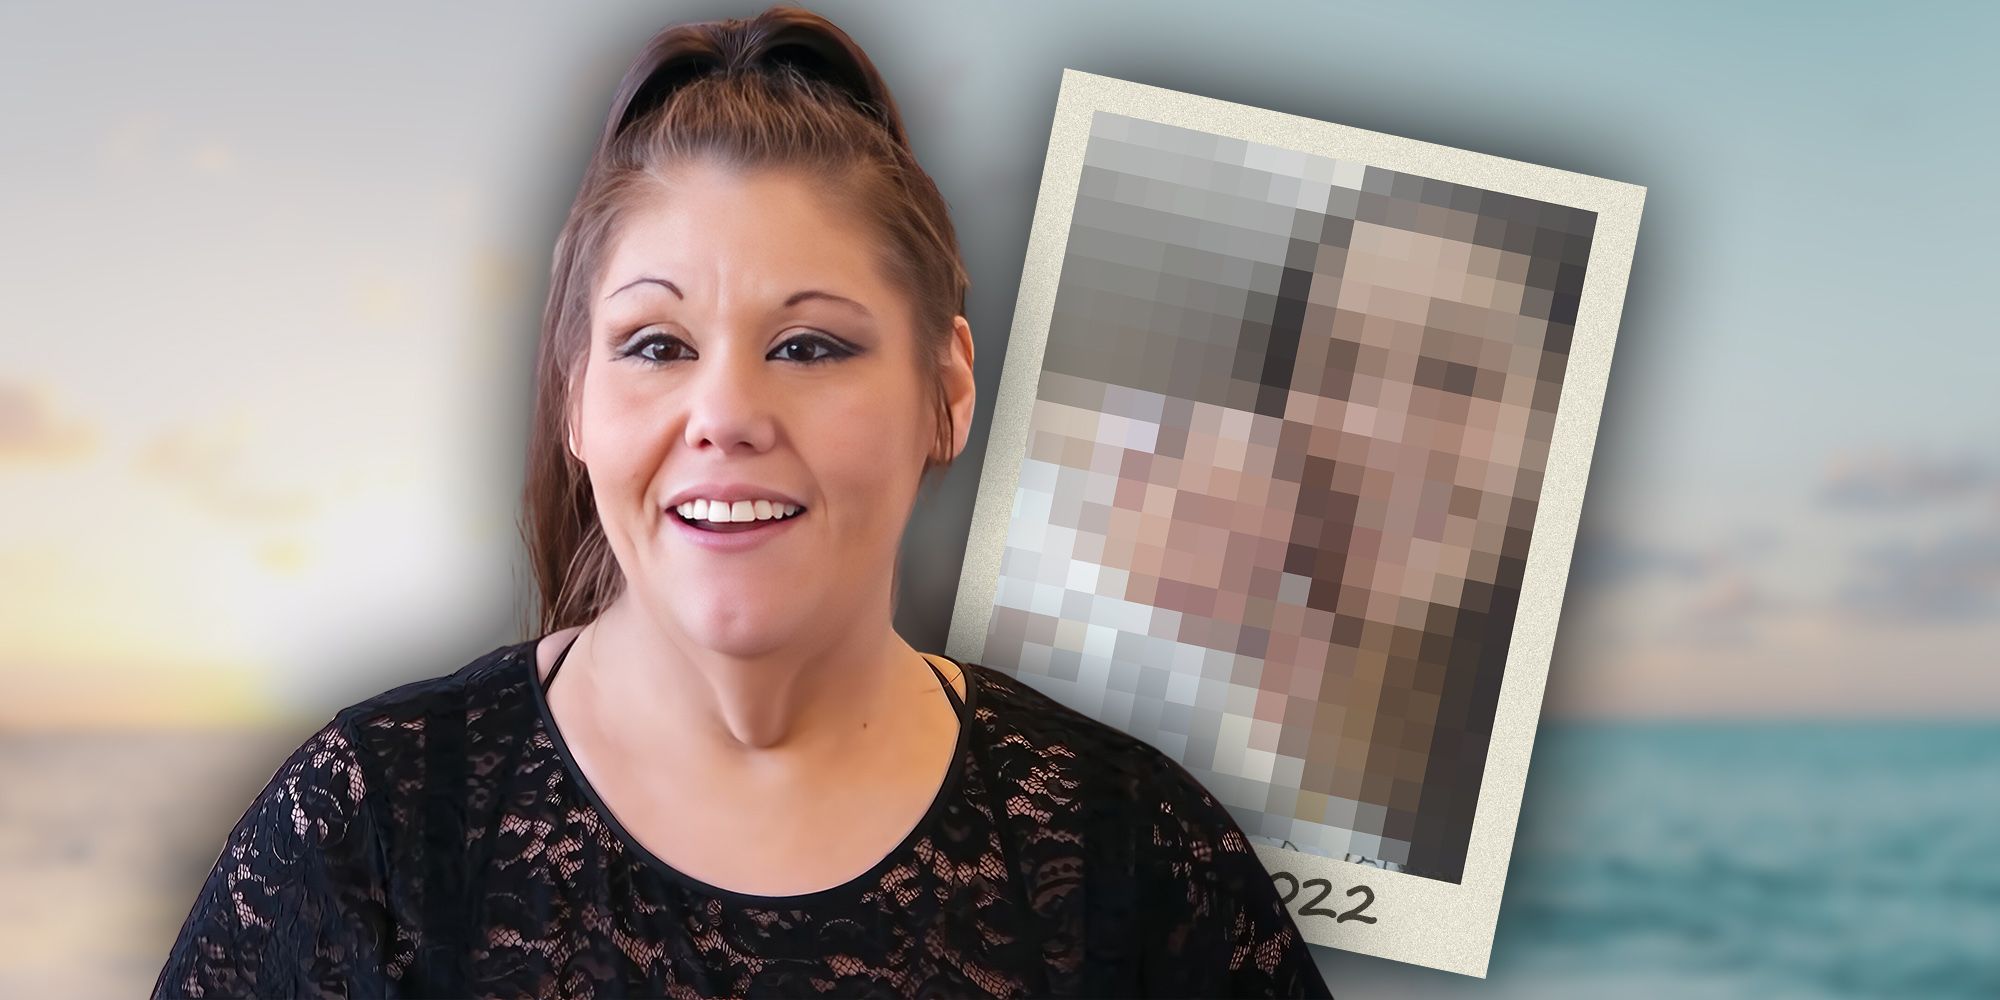 alicia kirgan my 600 lb life montage of thinner alicia with blurred inset